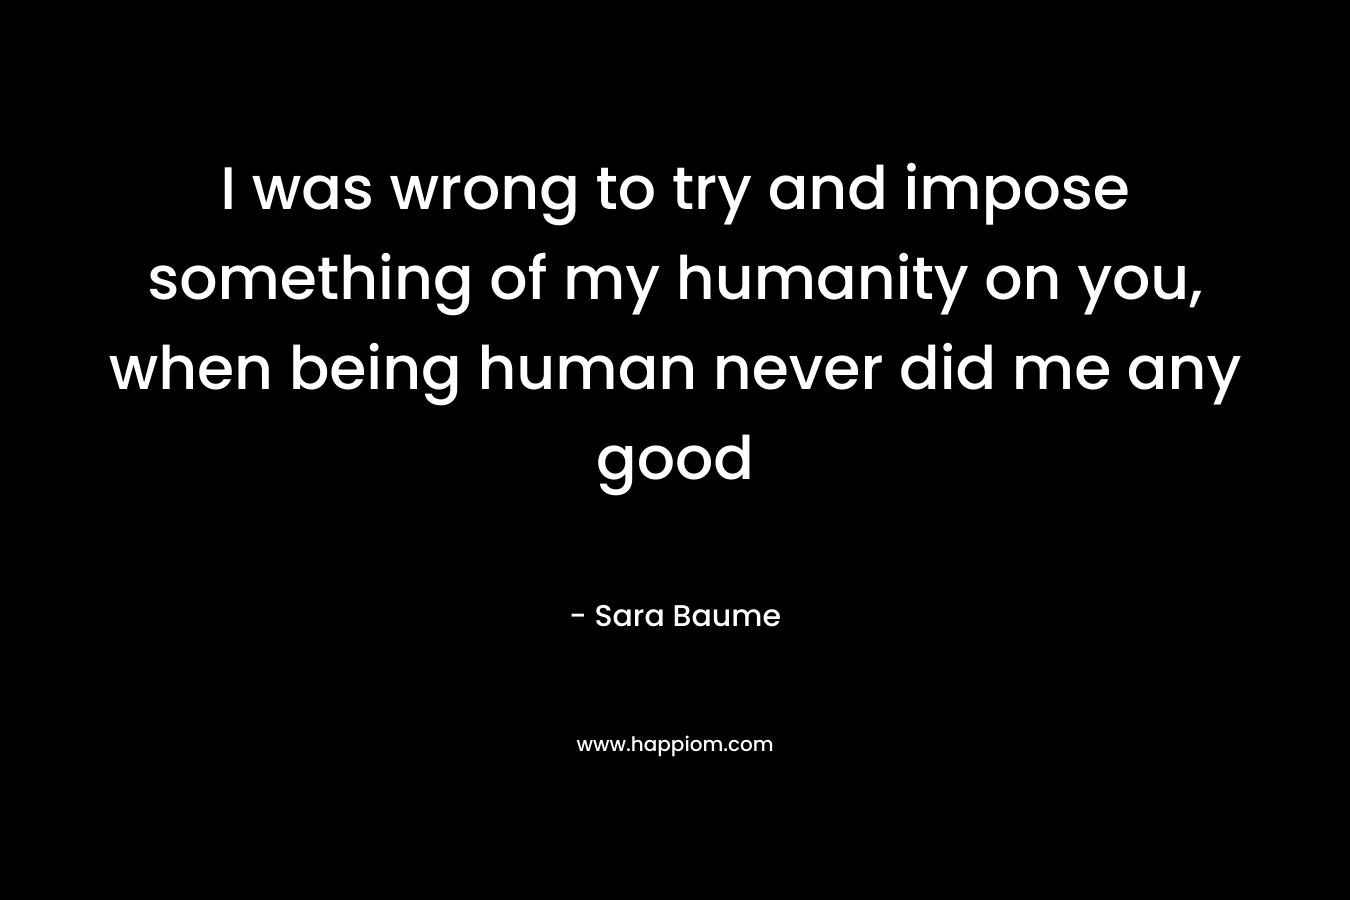 I was wrong to try and impose something of my humanity on you, when being human never did me any good